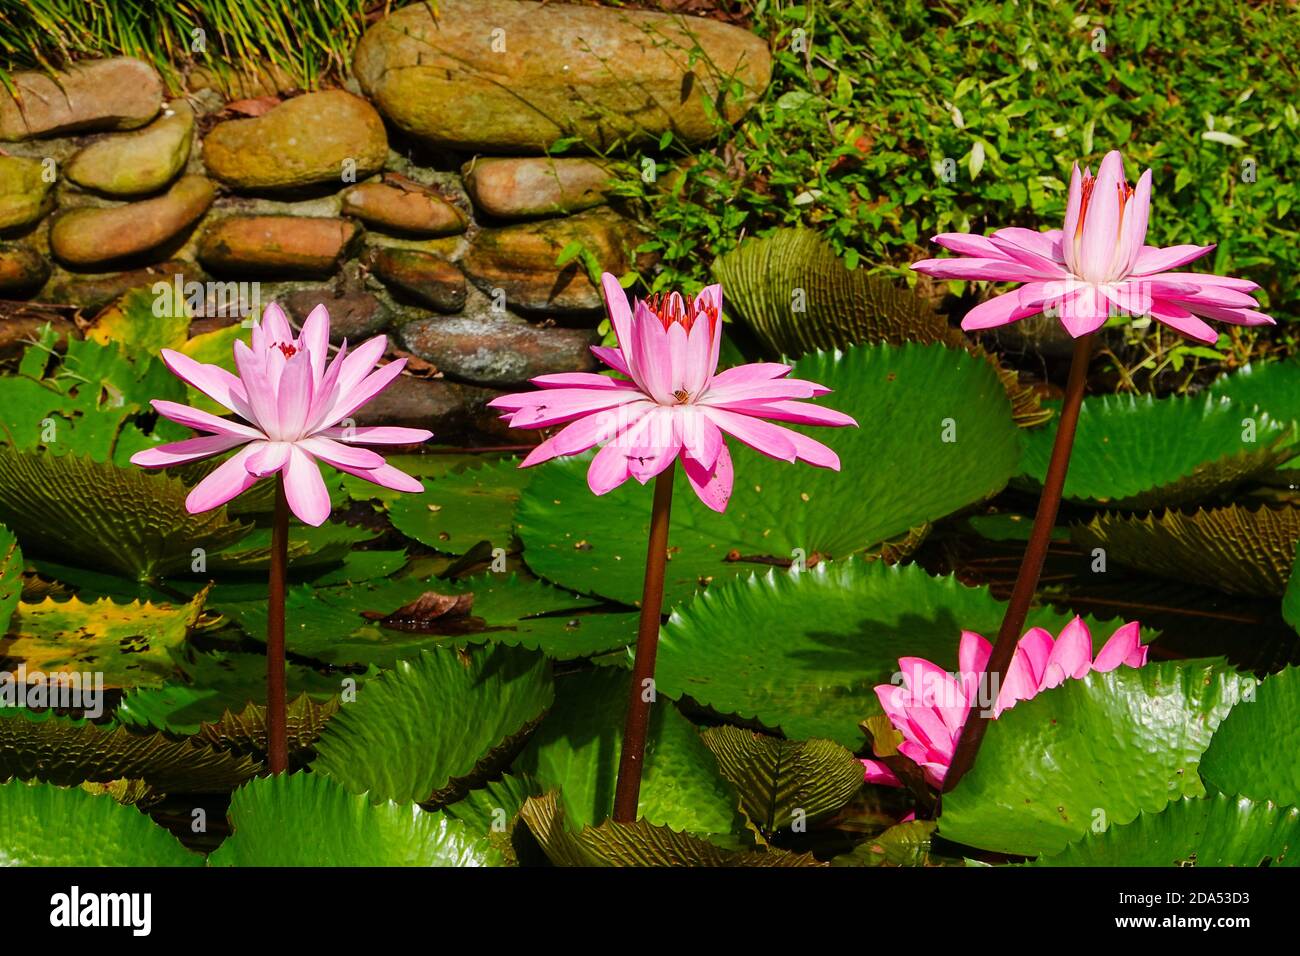 Lilies with purple blossoms, Nymphaea, in a pond bordered by a rock wall. Florida, USA. Stock Photo